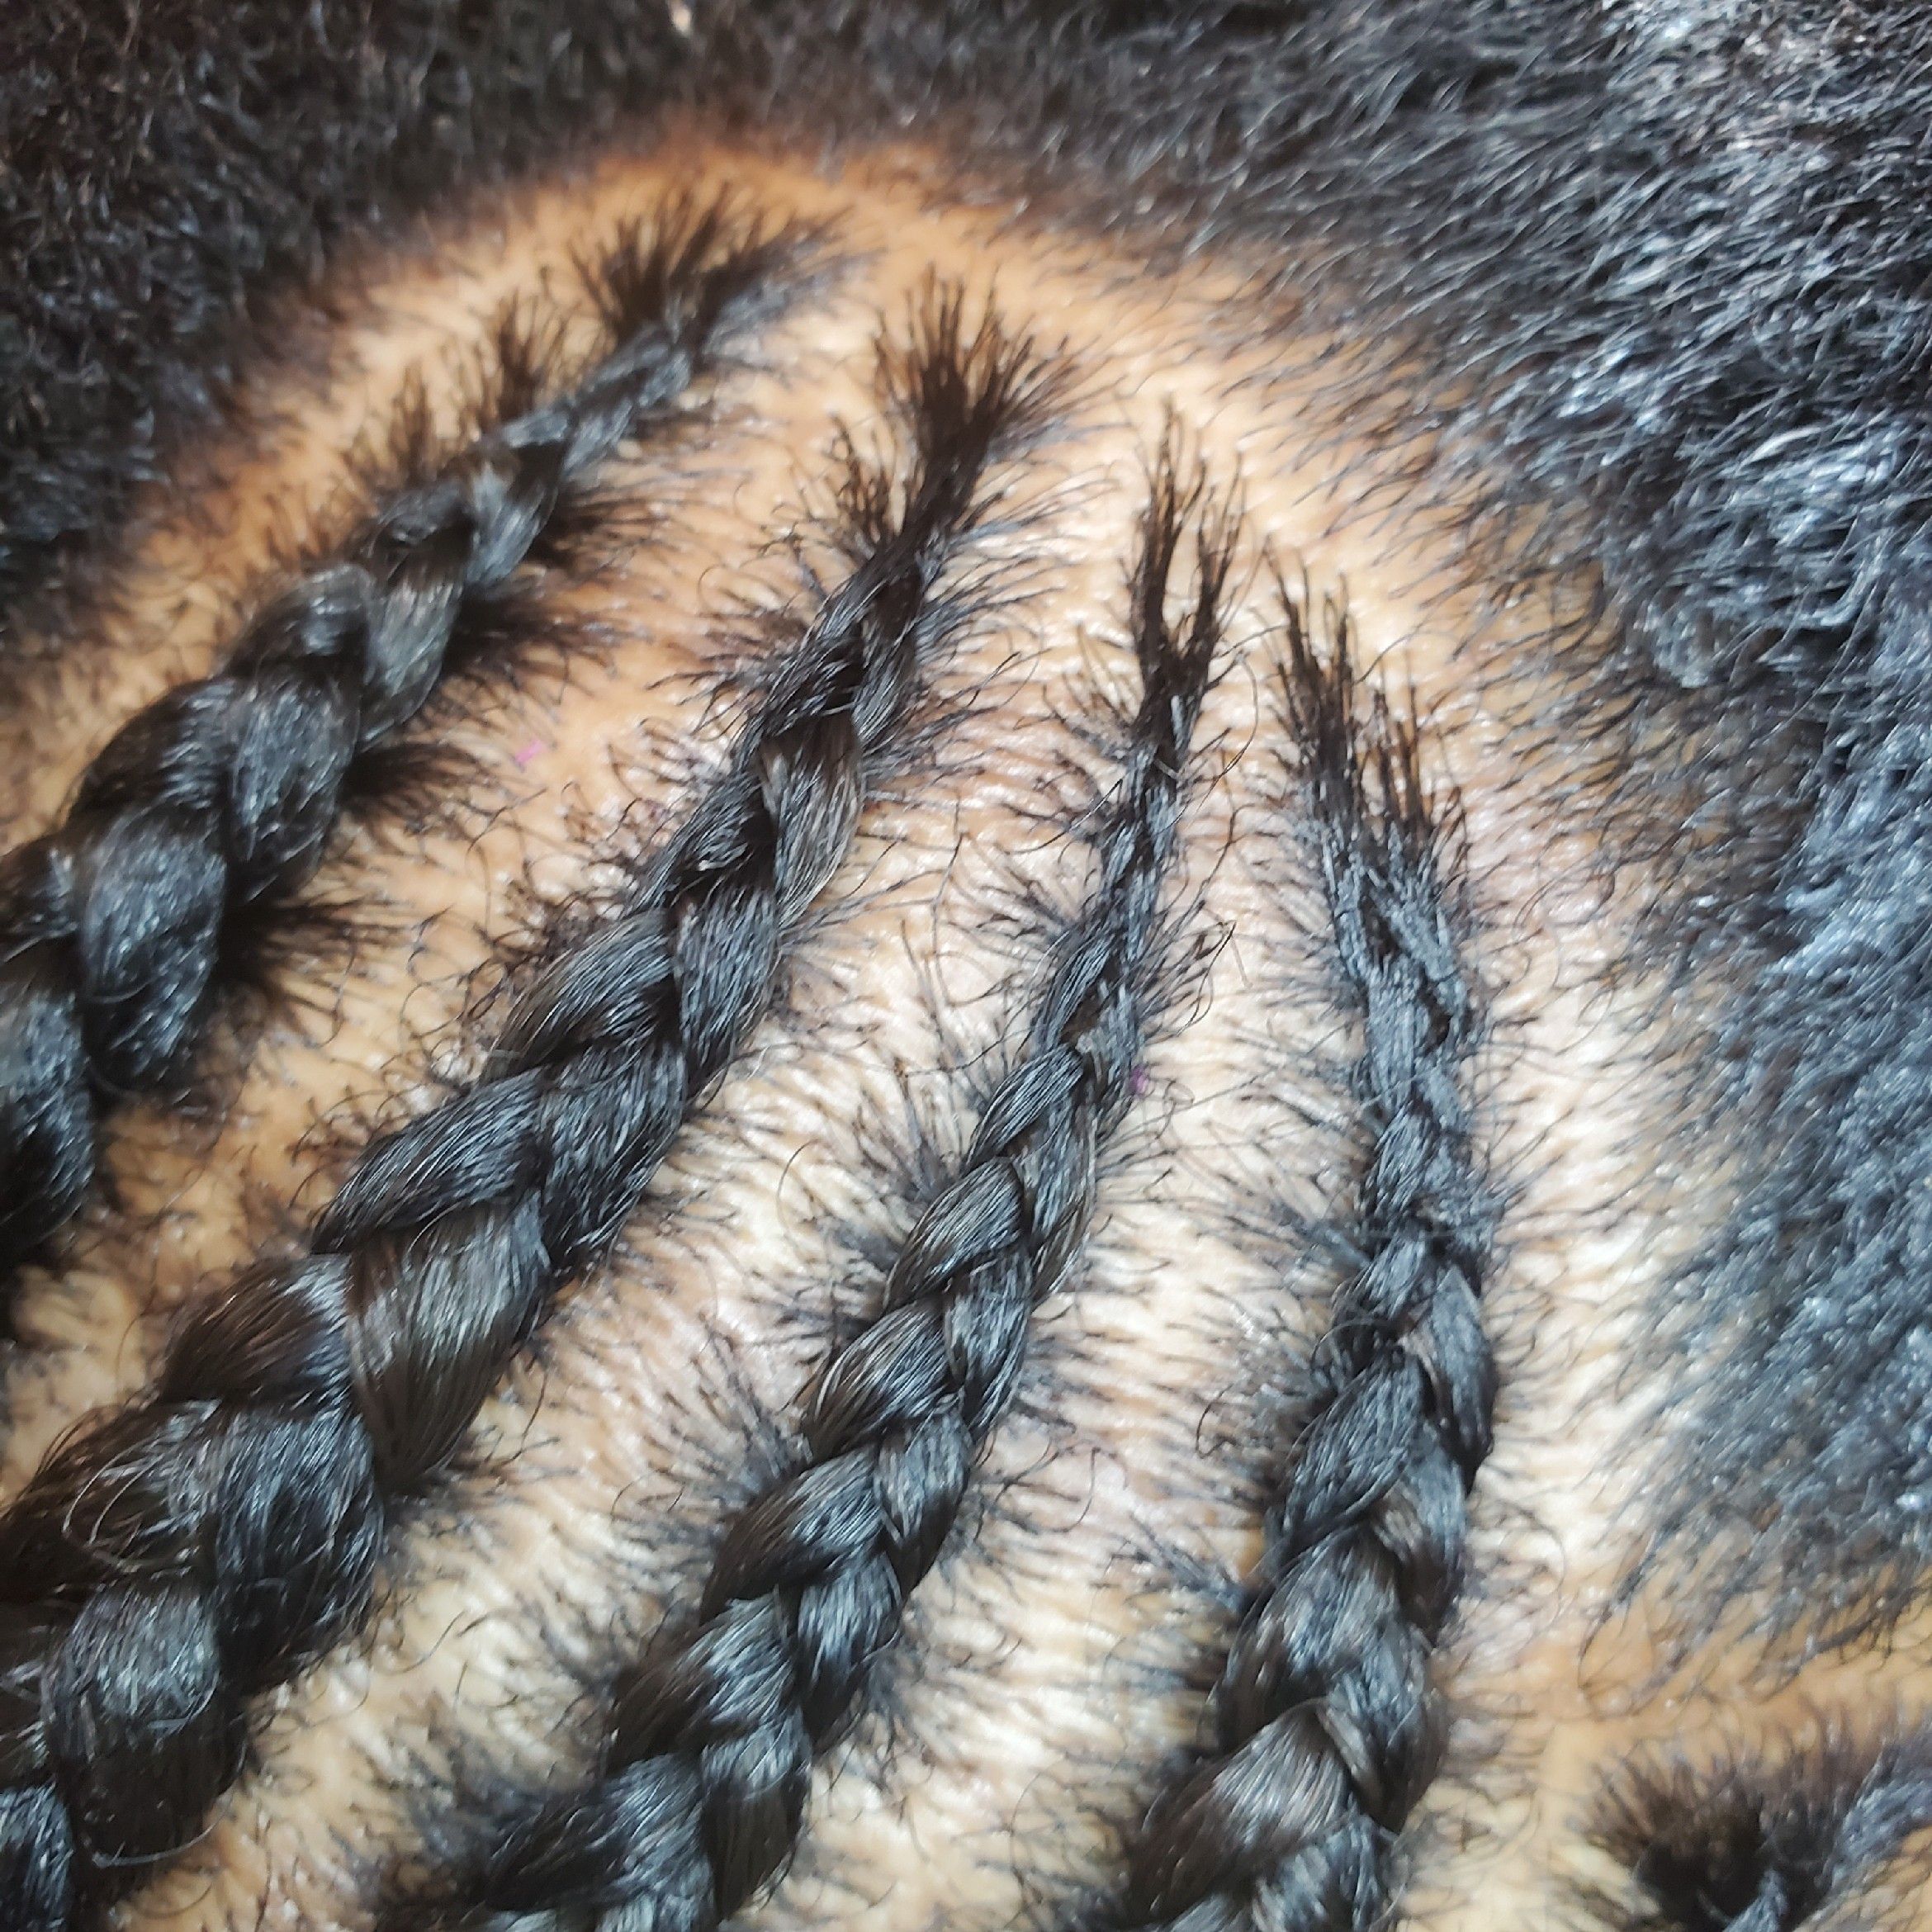 Feed In French Braids ( Large Straight Back) portfolio